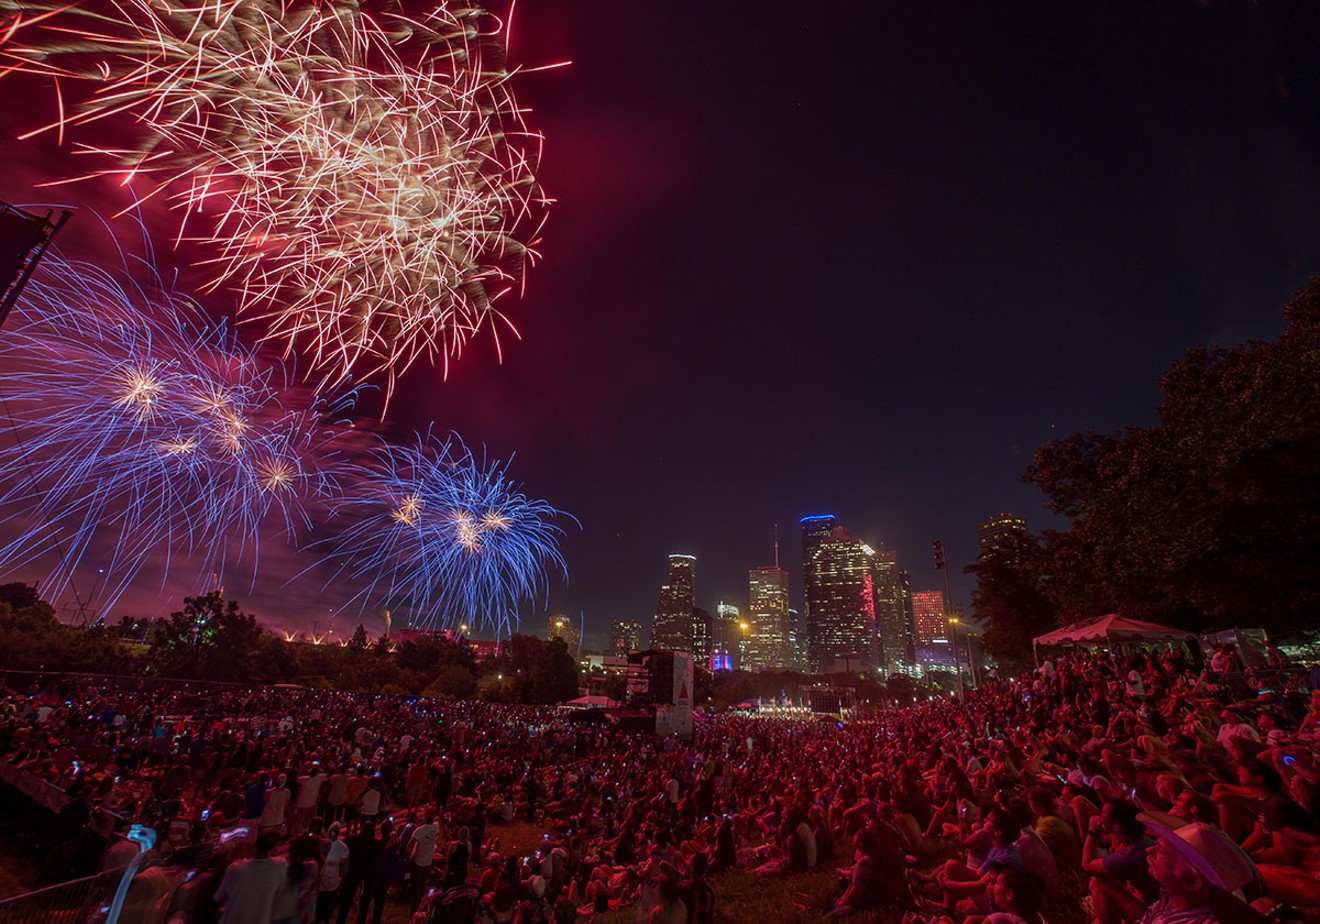 Houston's signature event, CITGO Freedom Over Texas, just got cooler with its new FOT2018 app that gives all the info on bands, attractions and fireworks — plus what to bring and what to leave home.